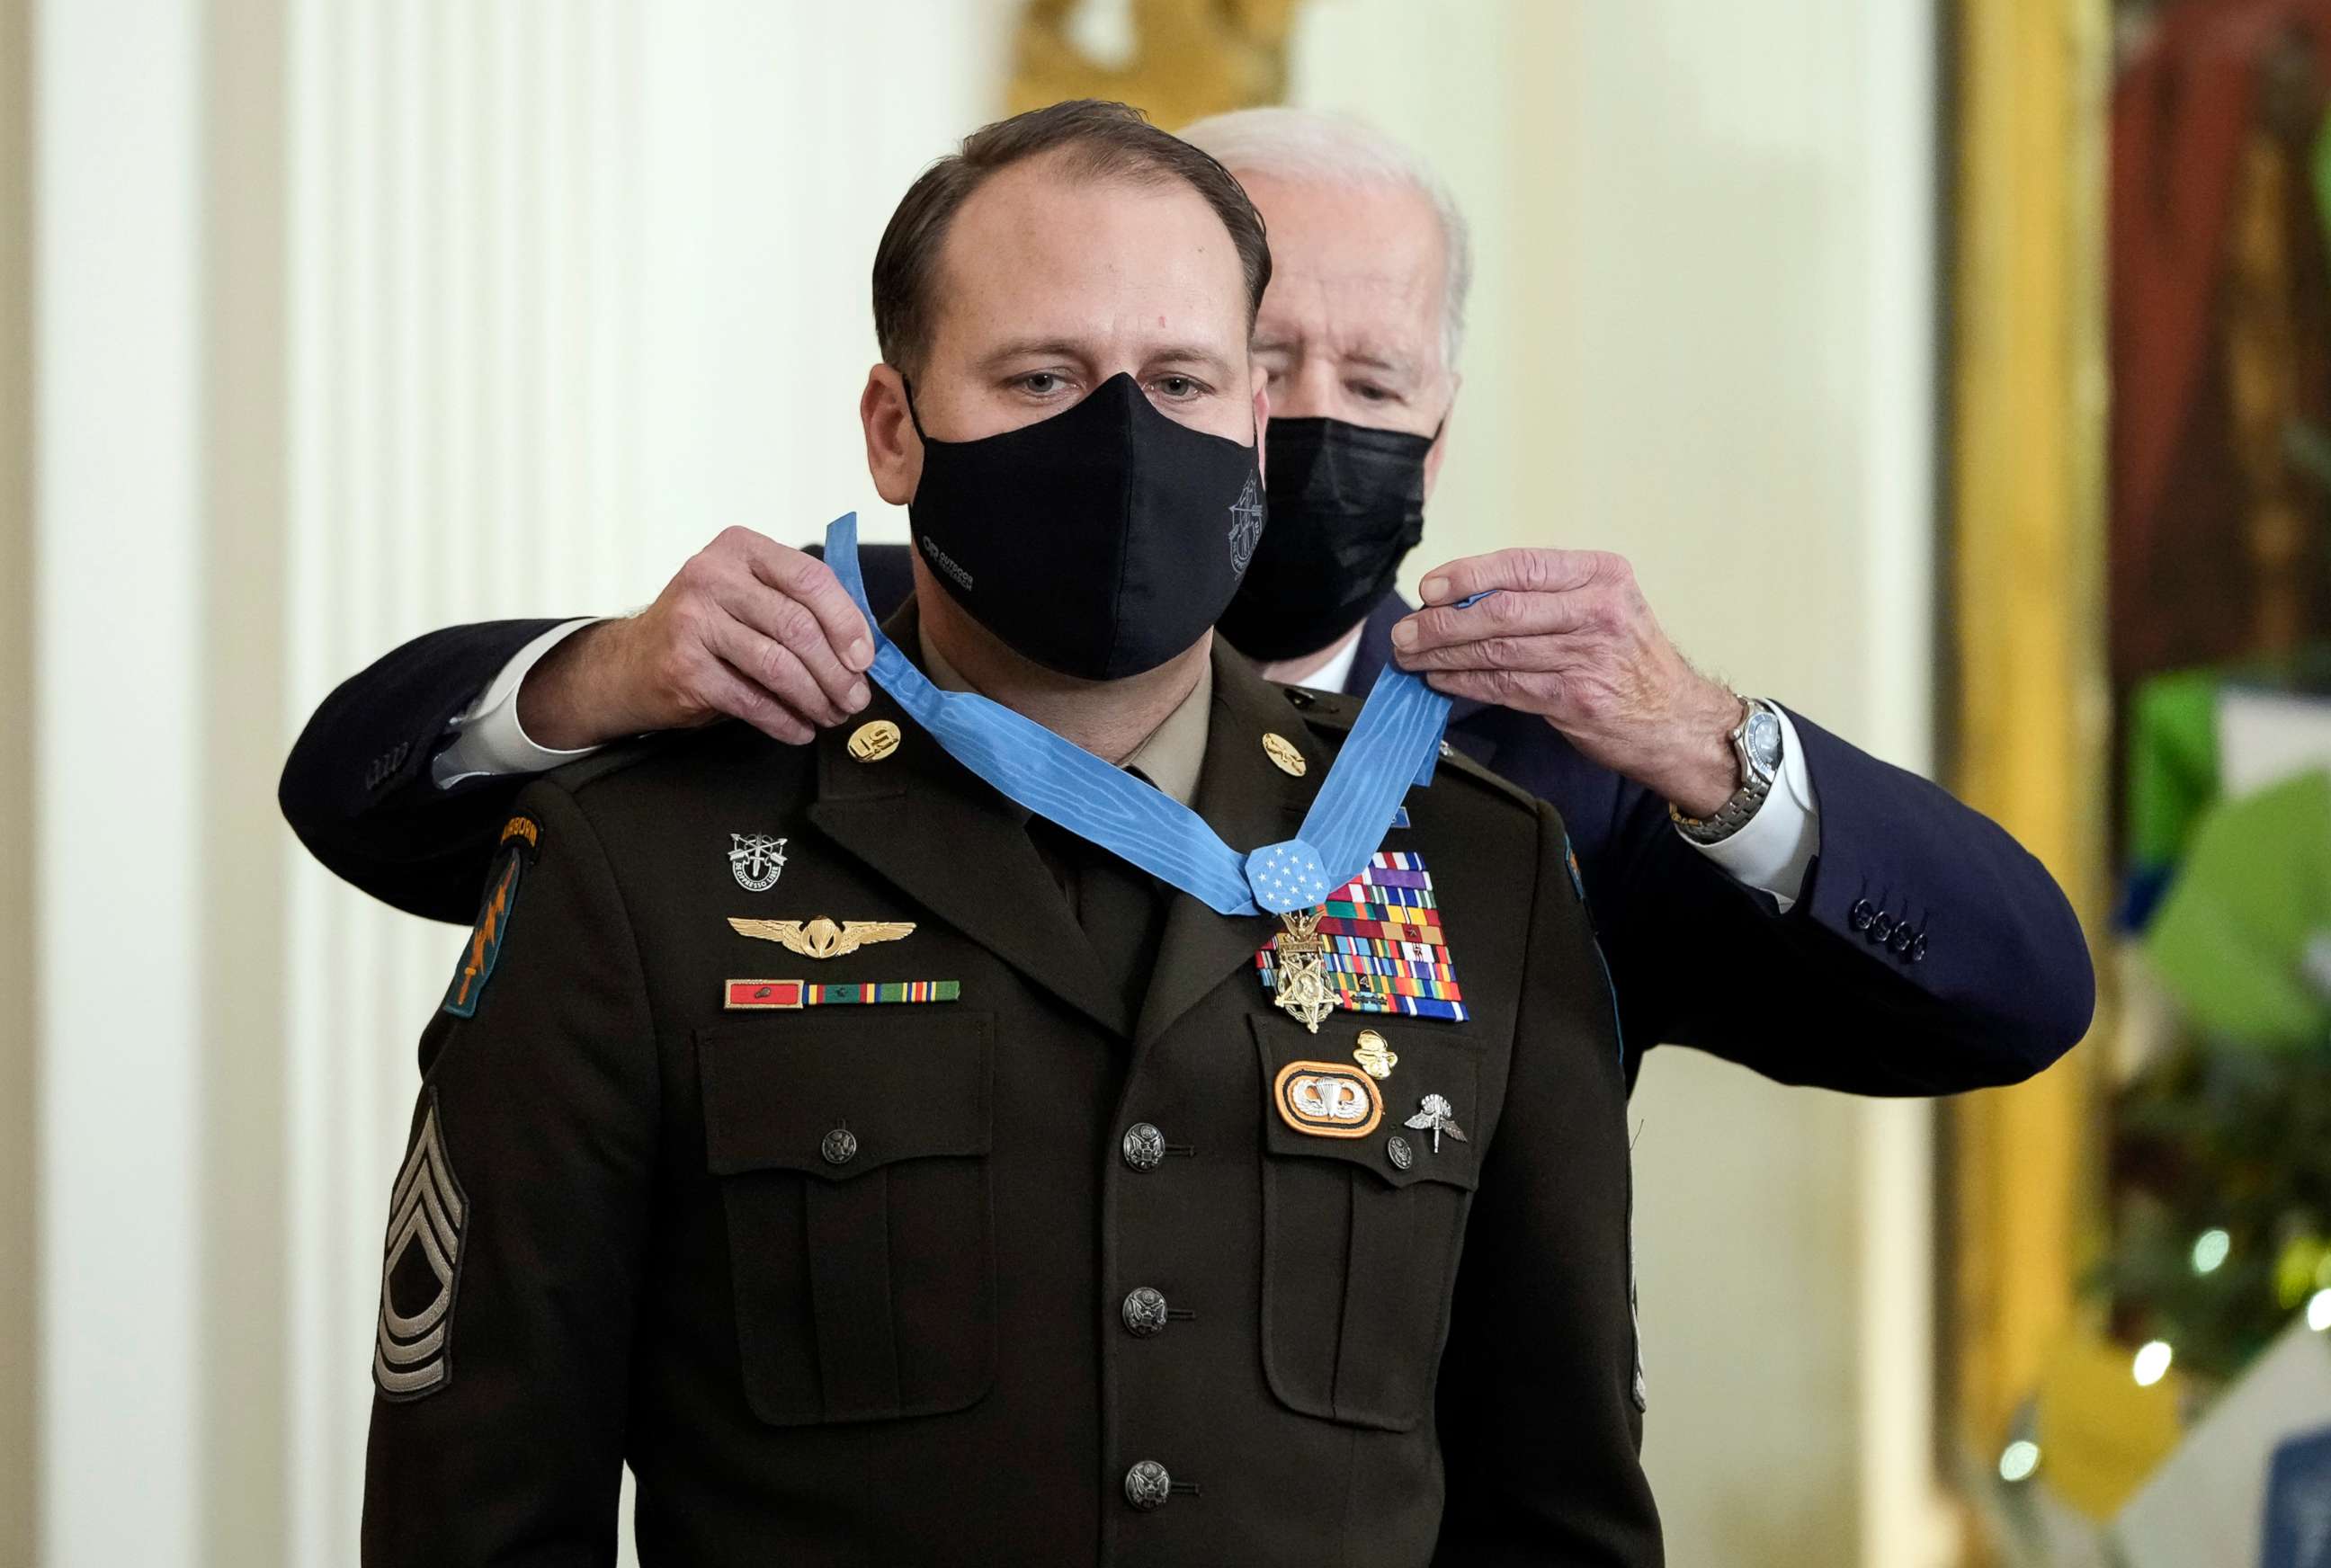 PHOTO: President Joe Biden awards the Medal of Honor to Army Master Sgt. Earl Plumlee in the East Room of the White House, on Dec. 16, 2021, in Washington, D.C.